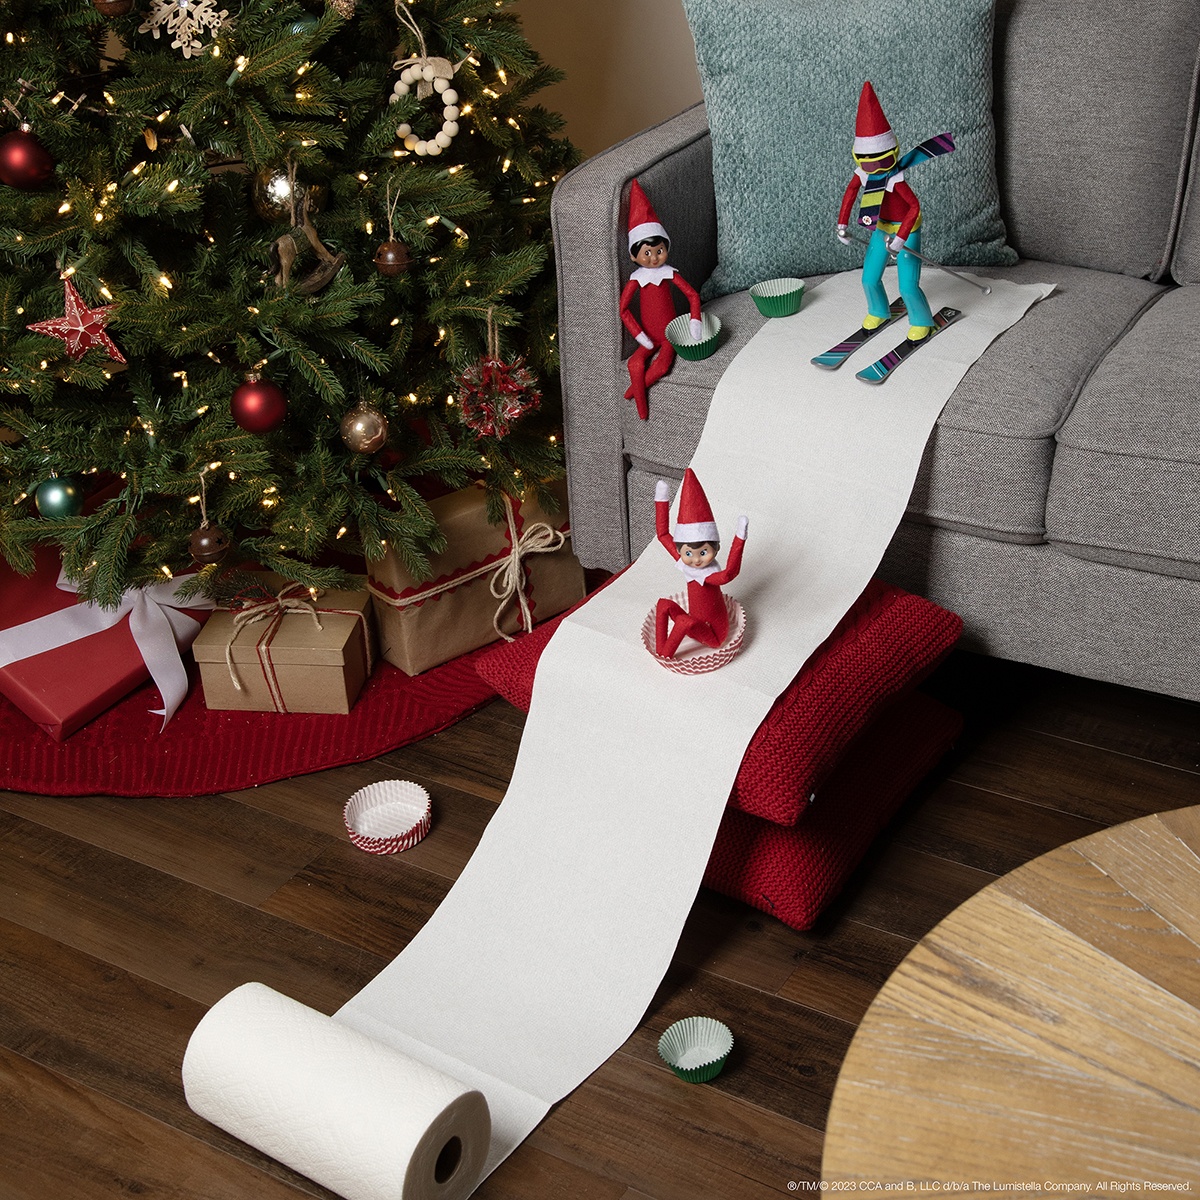 Alt text: The Elf on the Shelf and friends skiing using a snow hill made of paper towels and sleds made of cupcake wrapping papers.